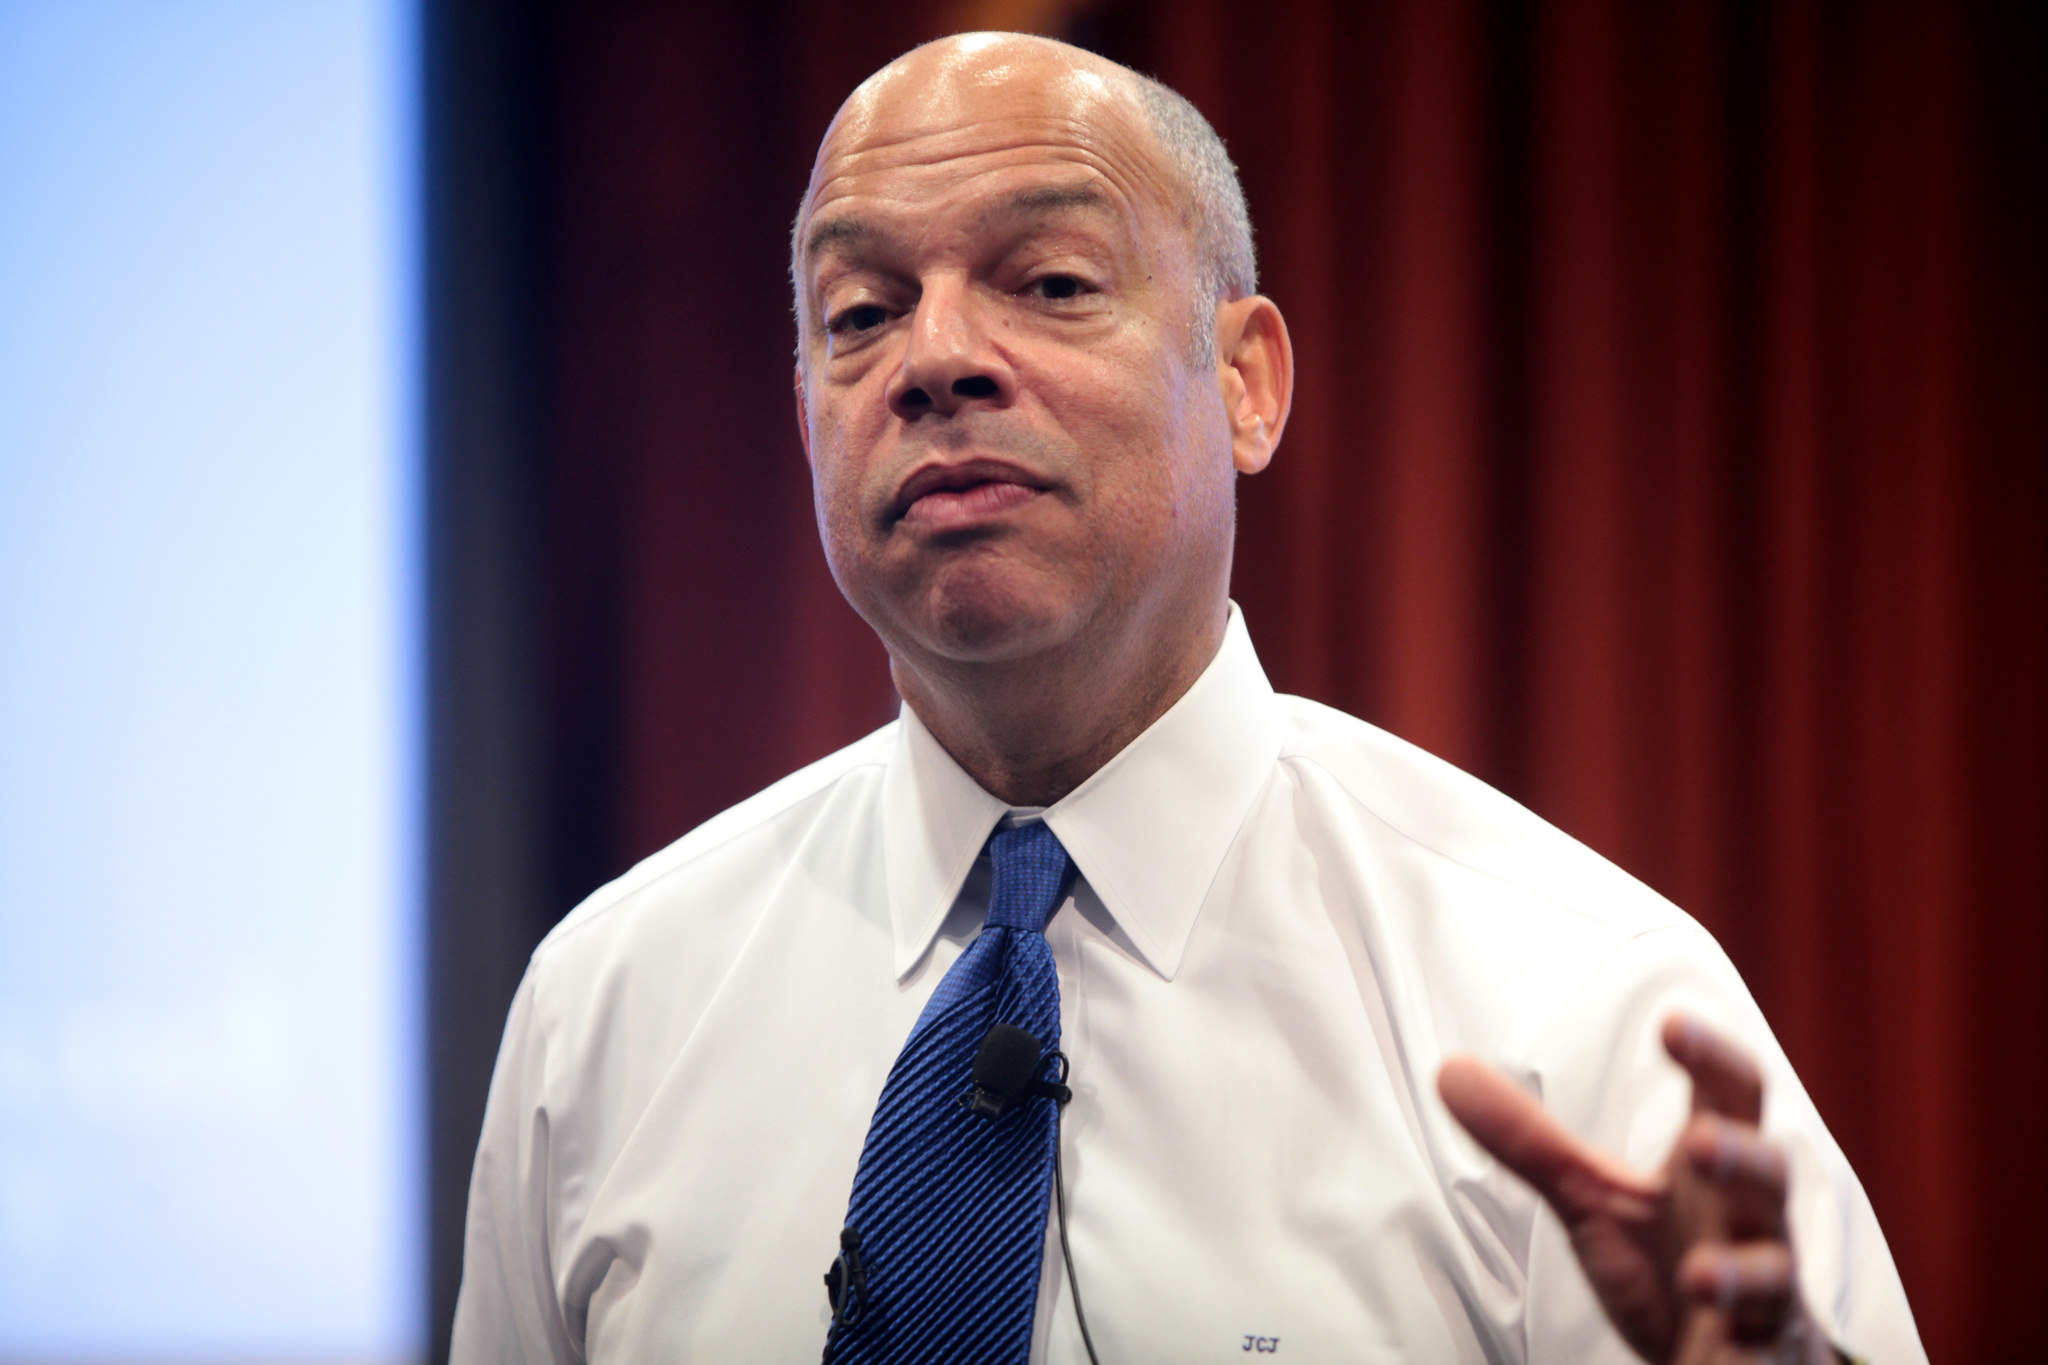 DHS Faces Challenges as It Rolls Out the Priority Enforcement Program